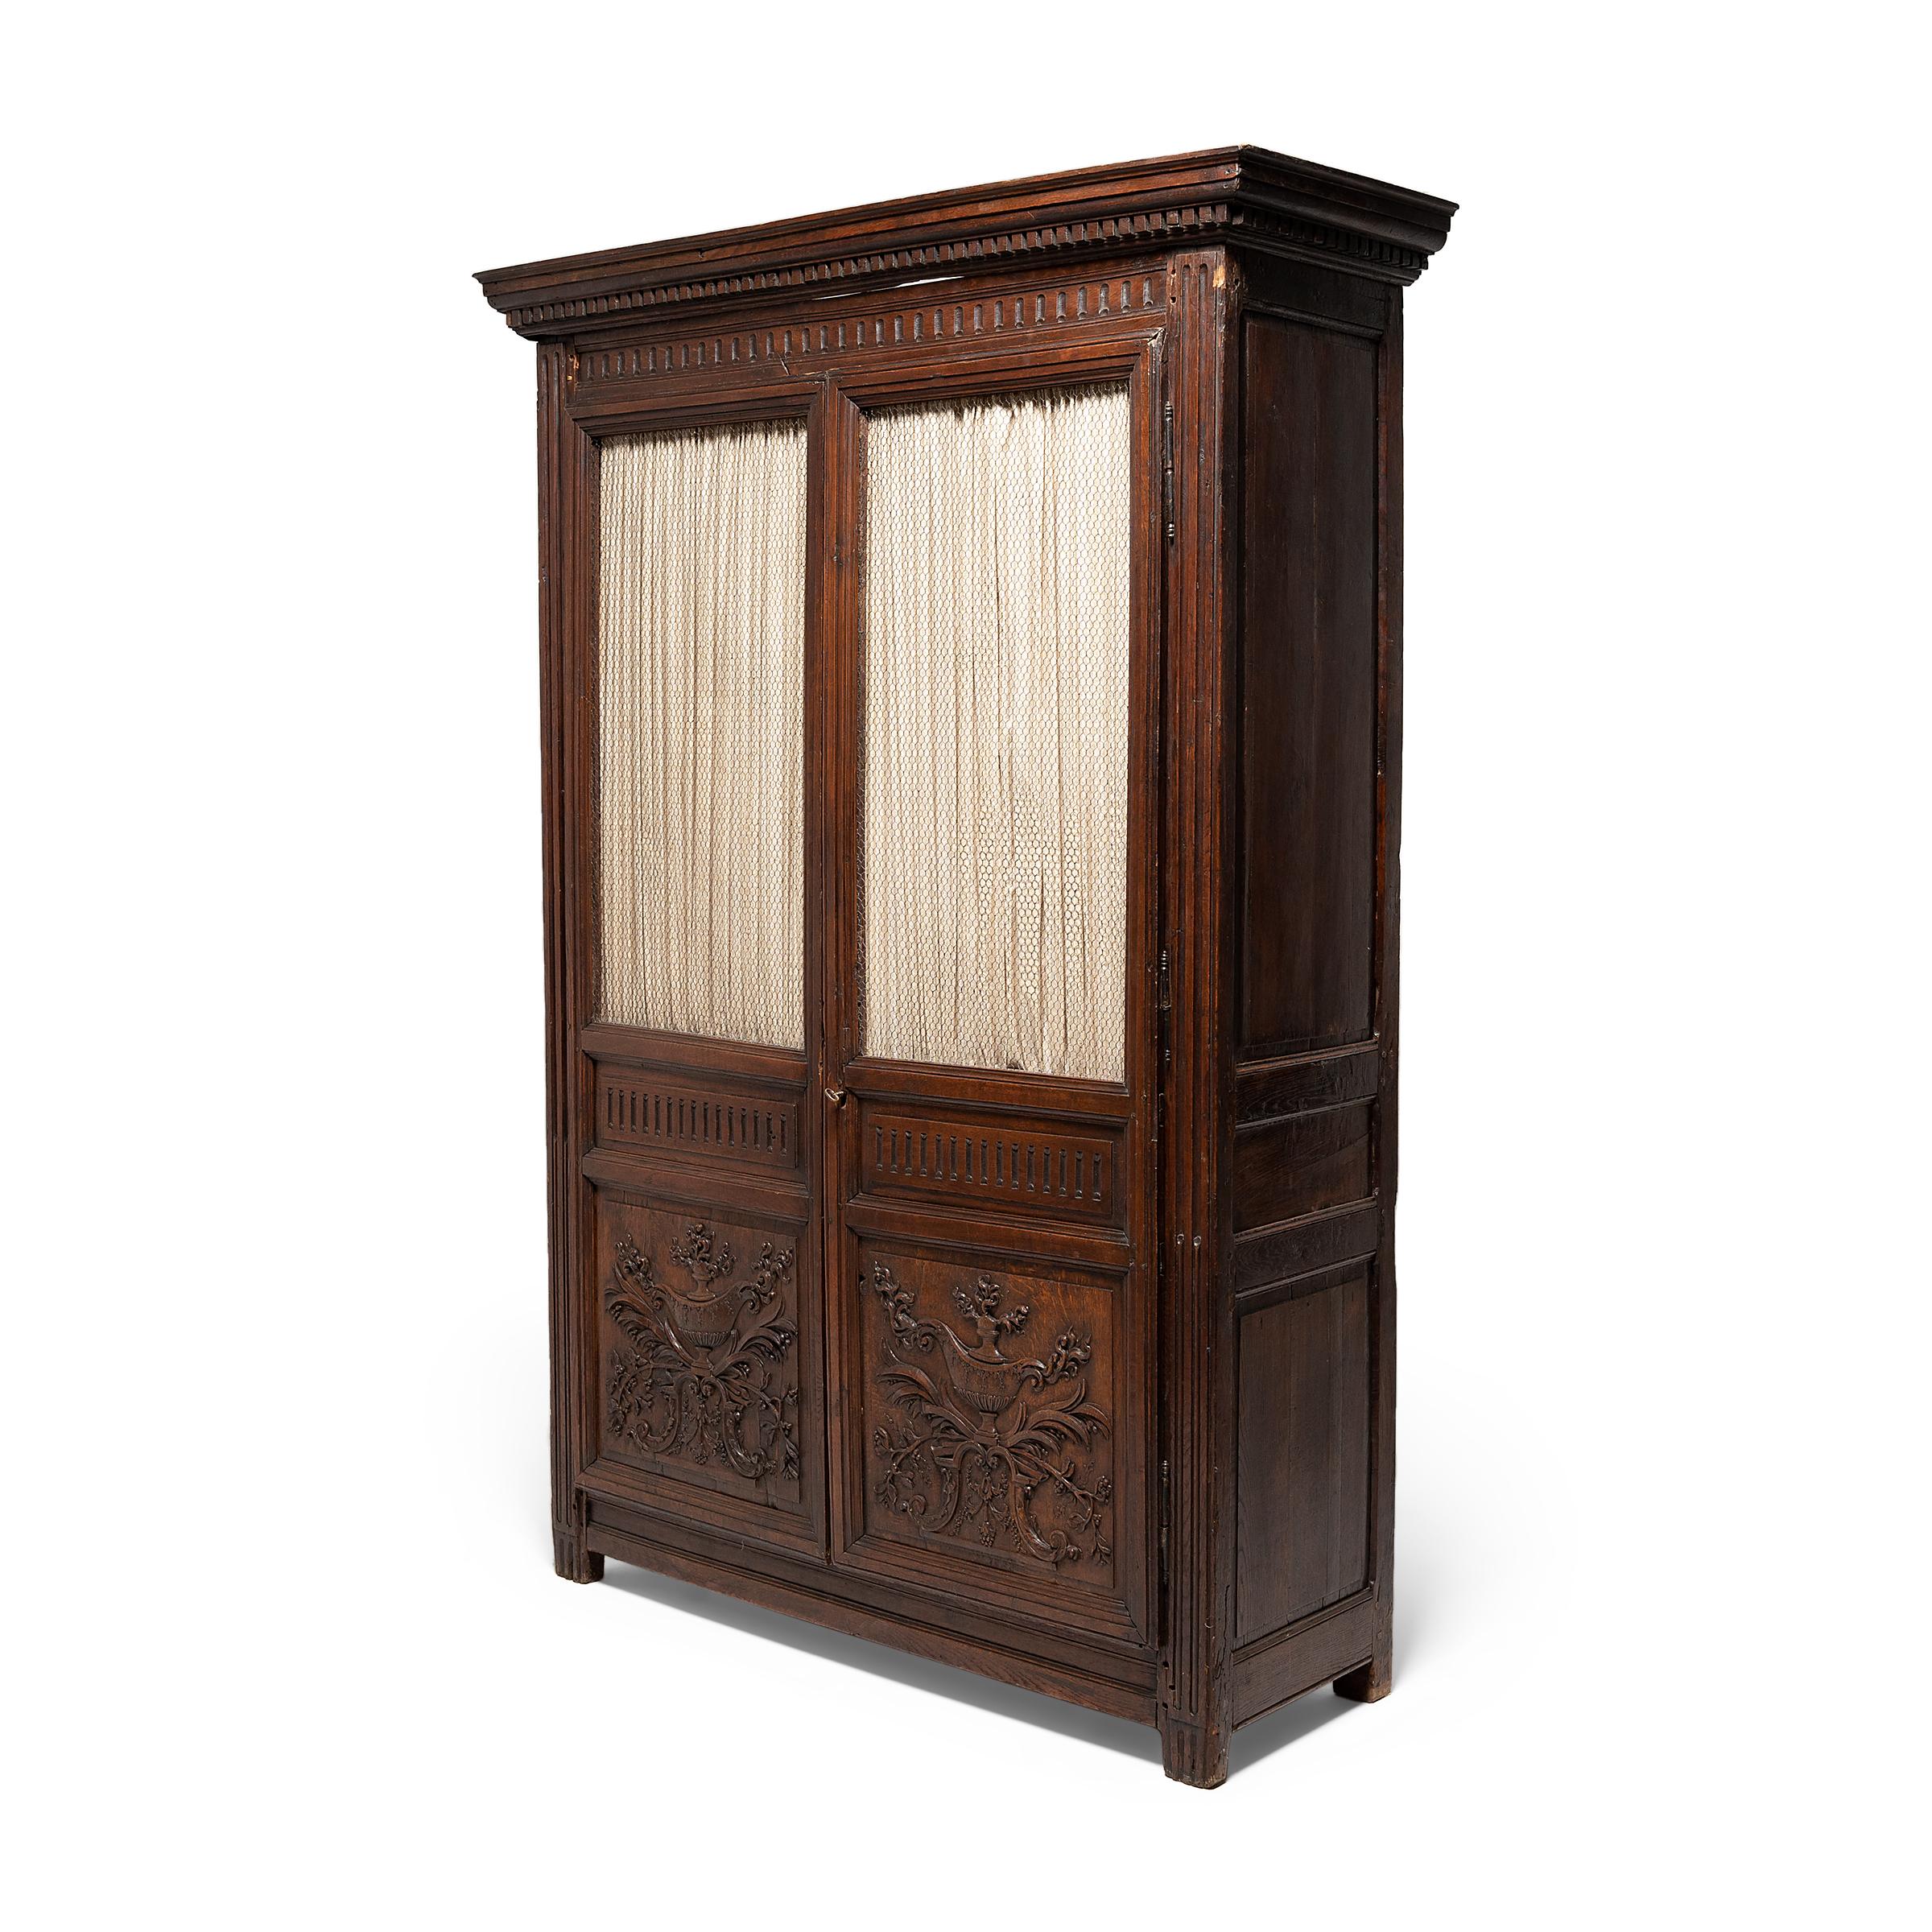 Grand Renaissance Revival Armoire with Wire Screens, circa 1800 In Fair Condition For Sale In Chicago, IL